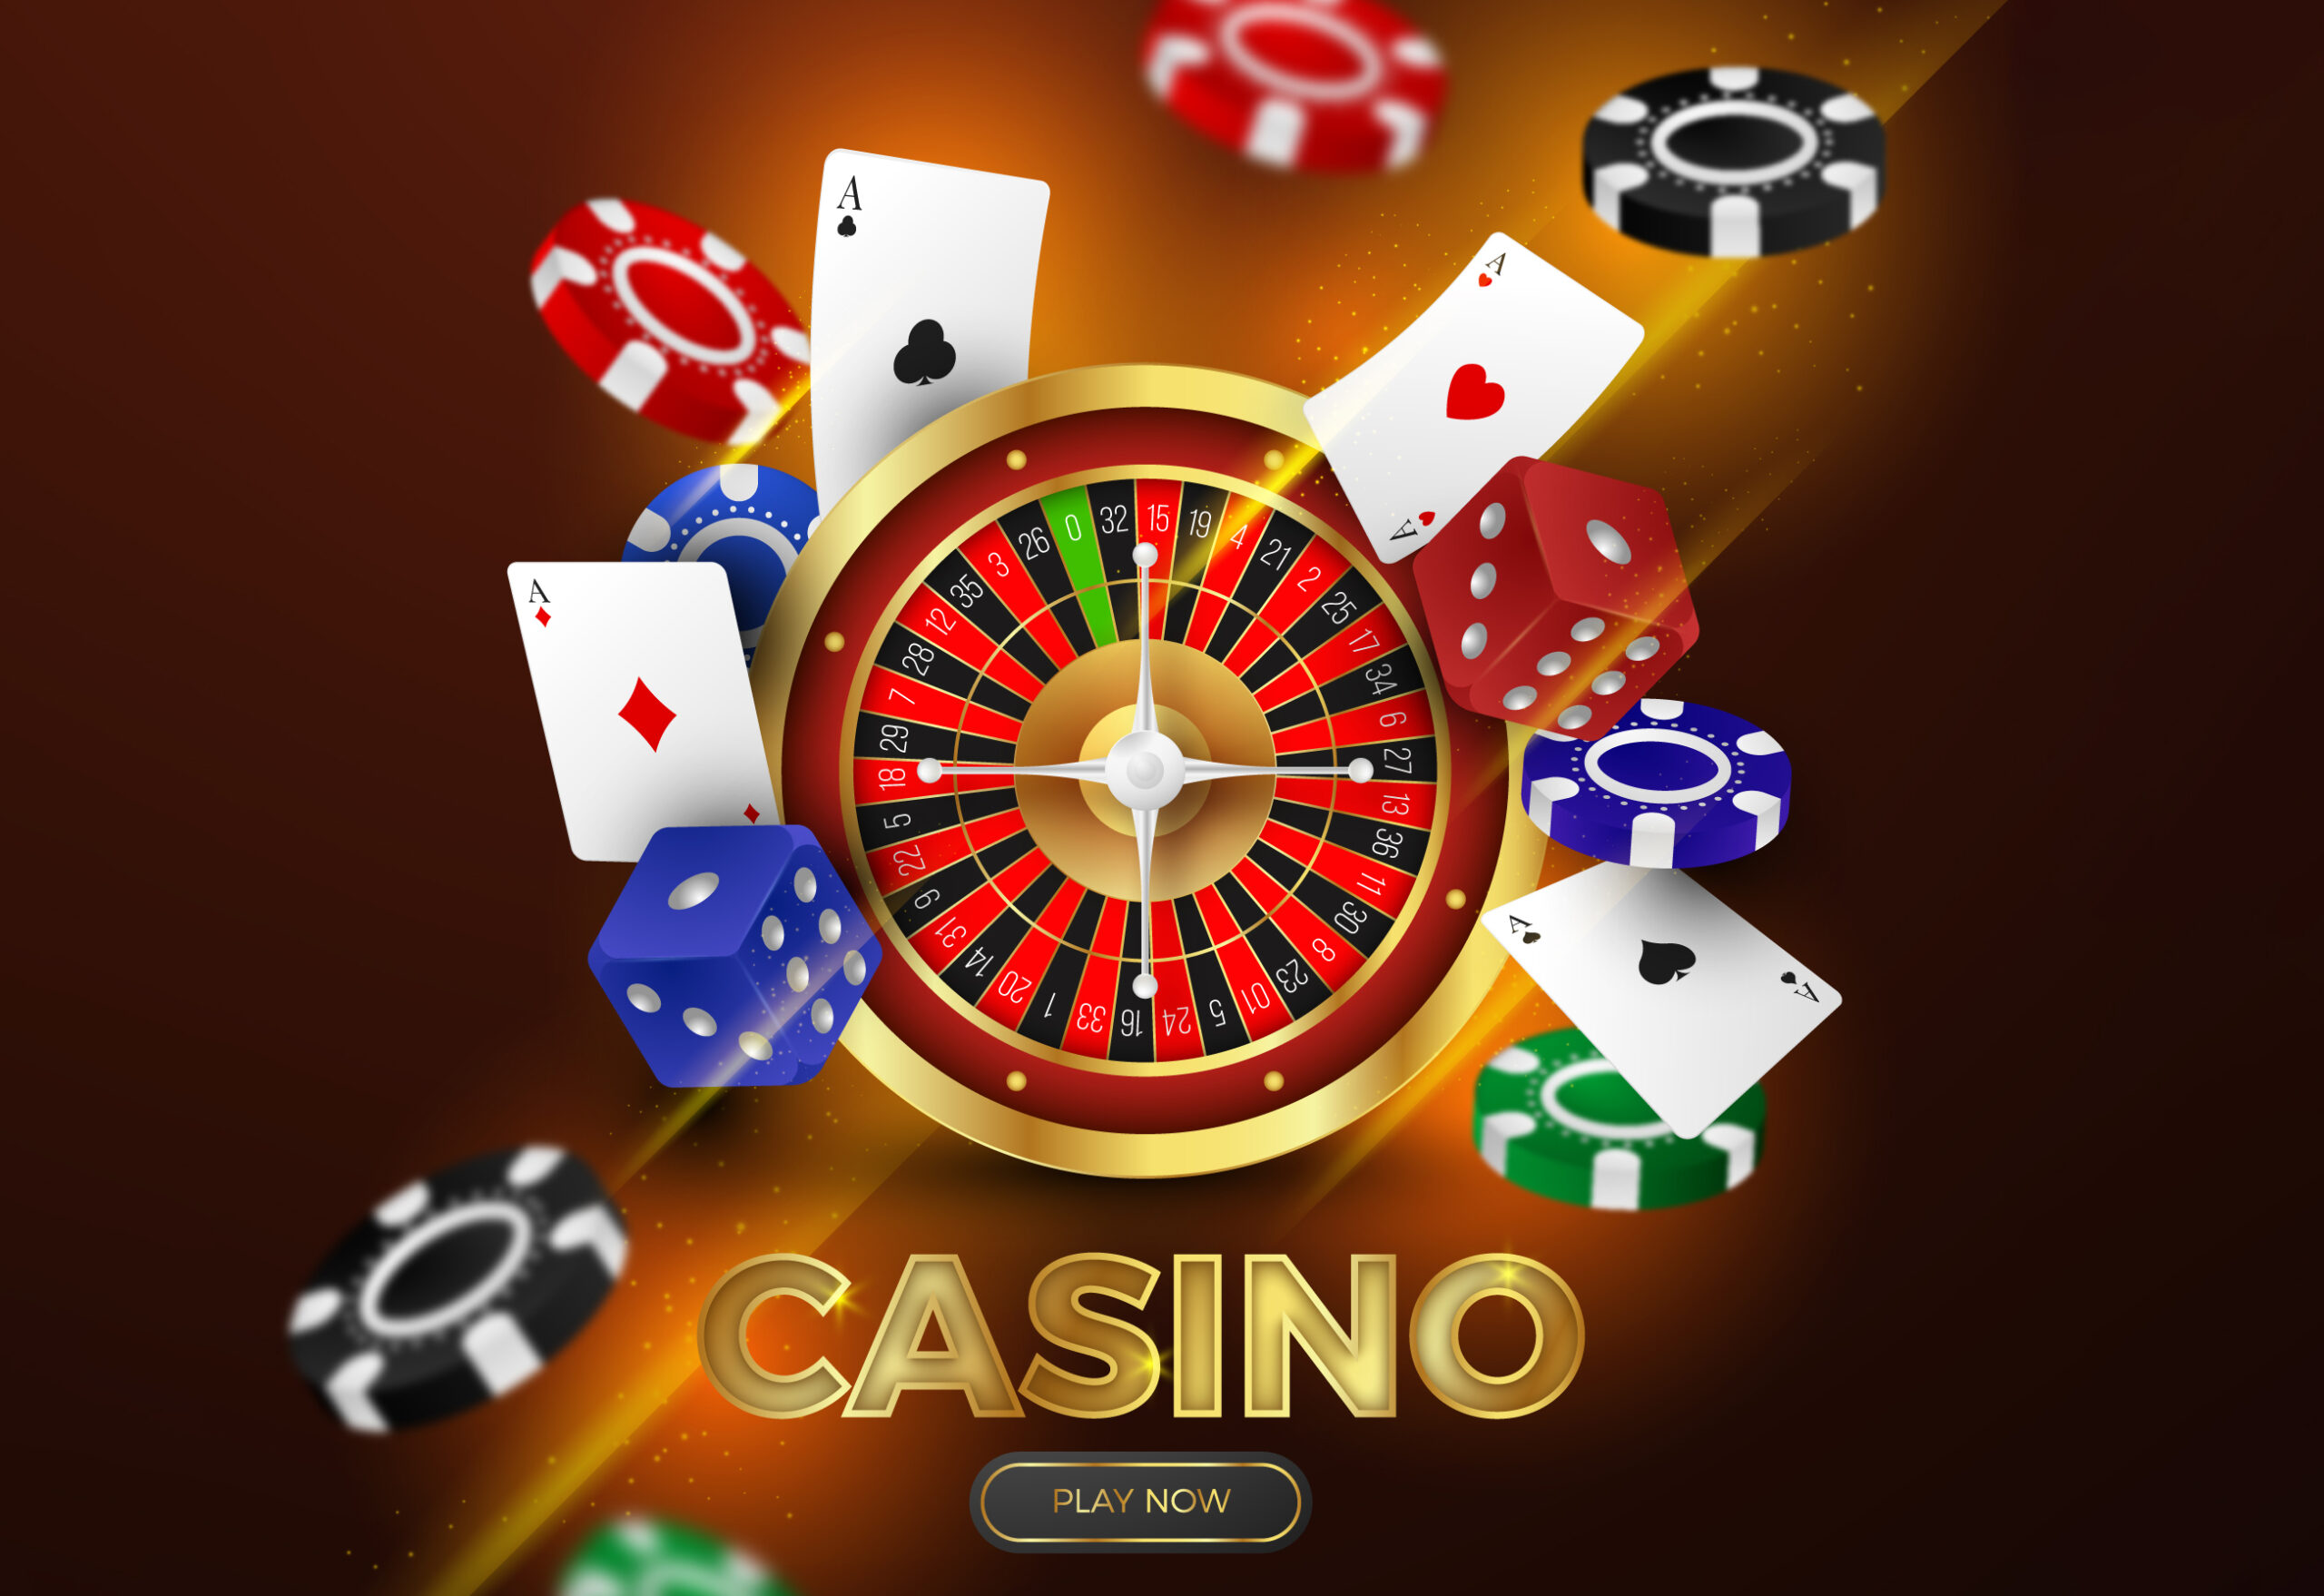 Woori Casino’s Finest: The King Plus Casino Introduces Pragmatic Play for Unmatched Excitement